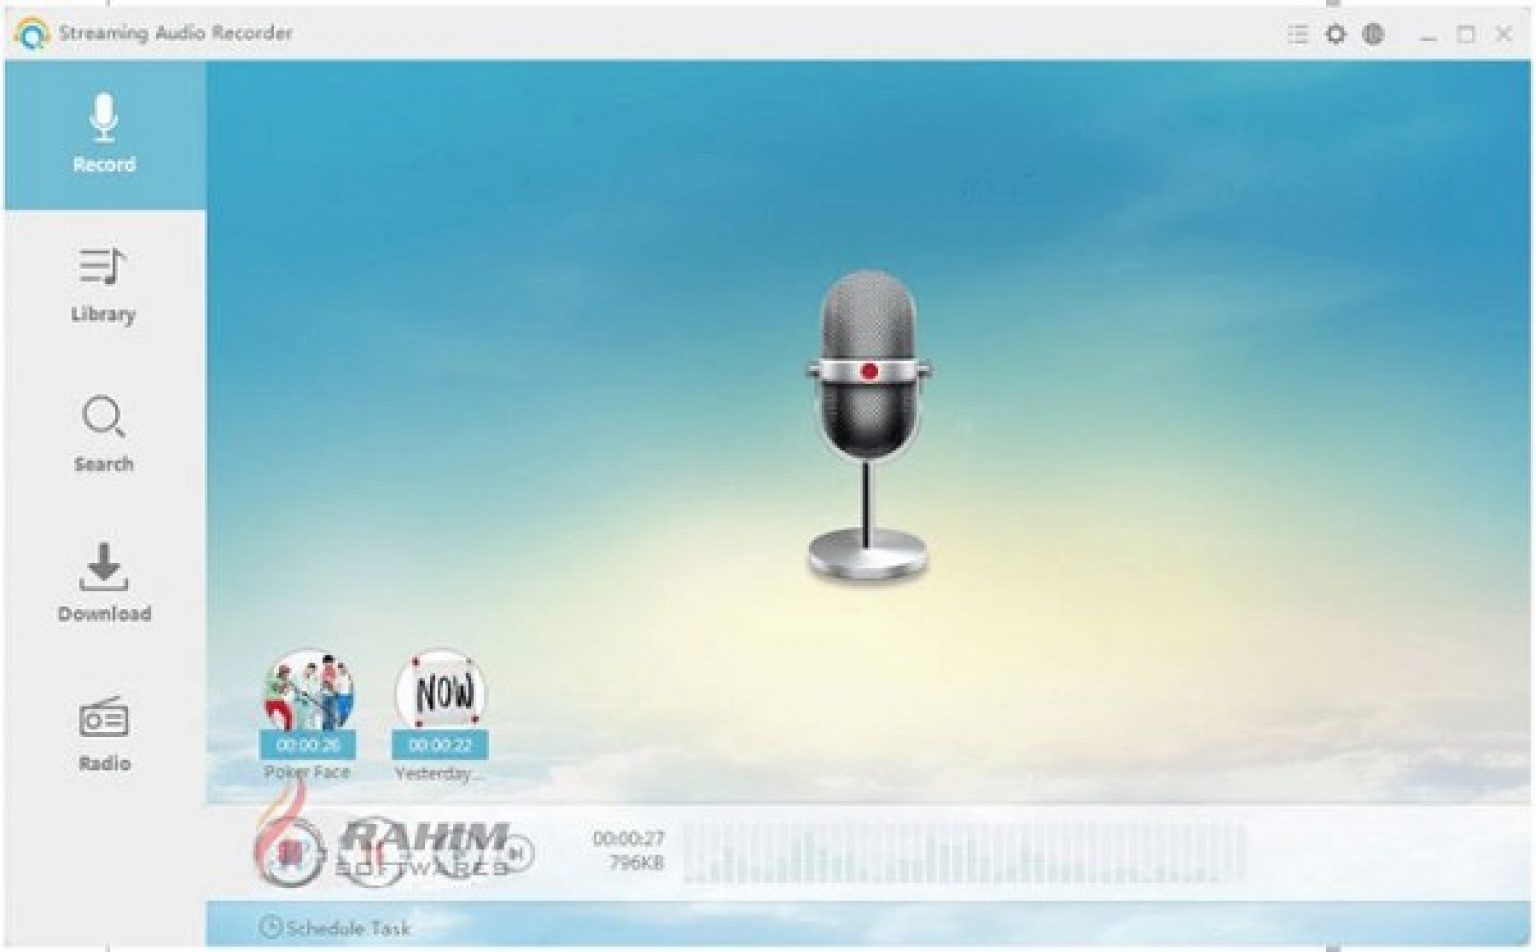 Abyssmedia i-Sound Recorder for Windows 7.9.4.3 for ipod download